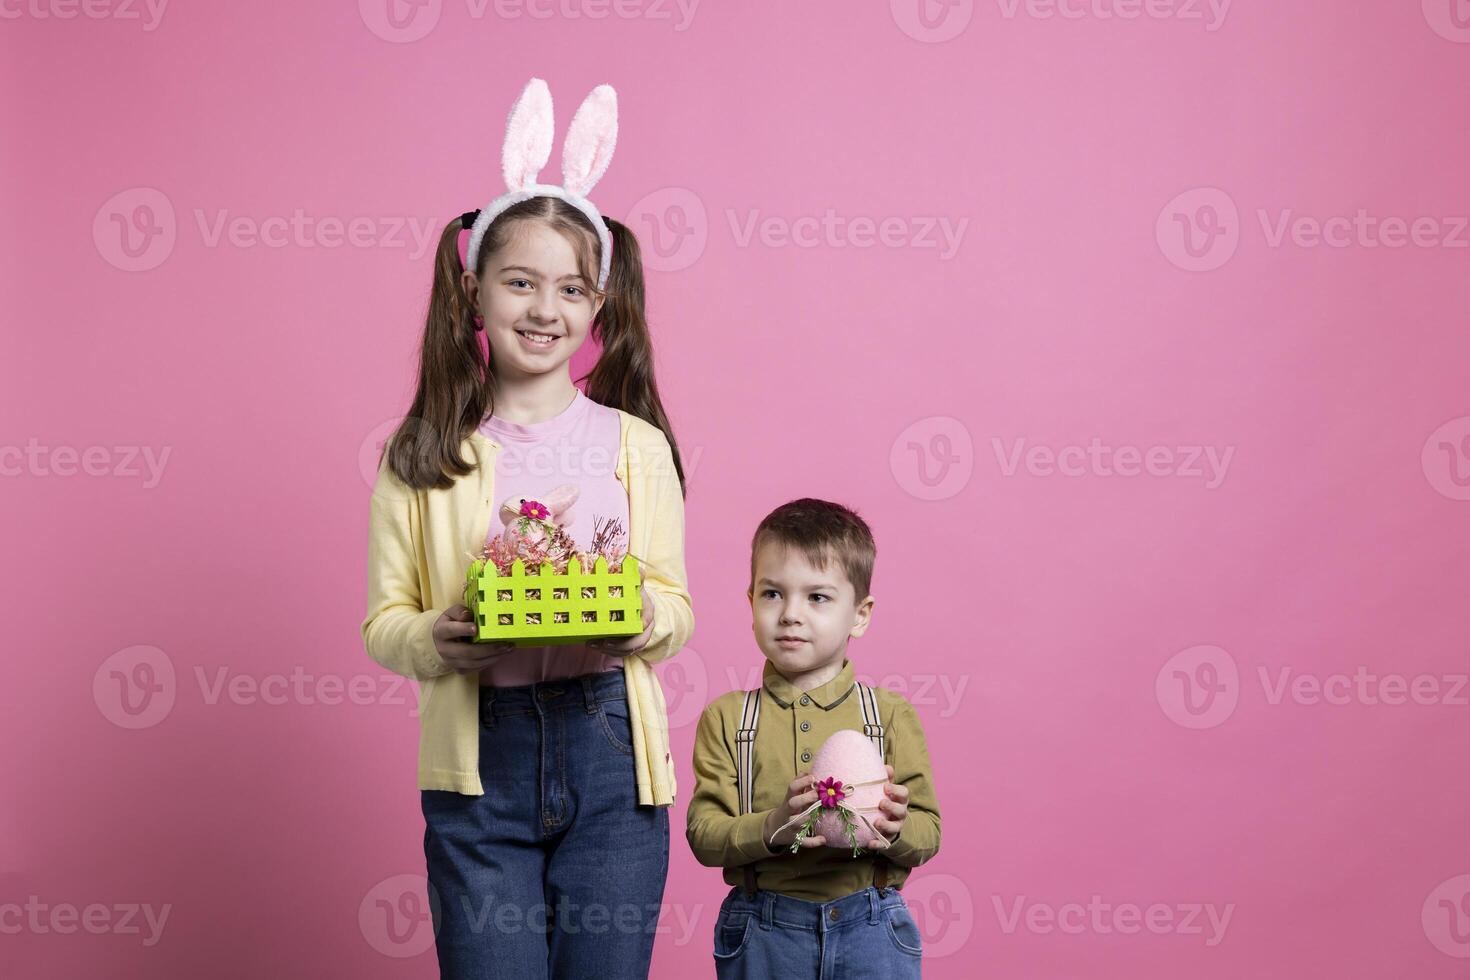 Small cute children showing easter ornaments and toys in studio, posing for a holiday celebration photoshoot. Little brother and sister siblings feeling excited about spring festivity and gifts. photo